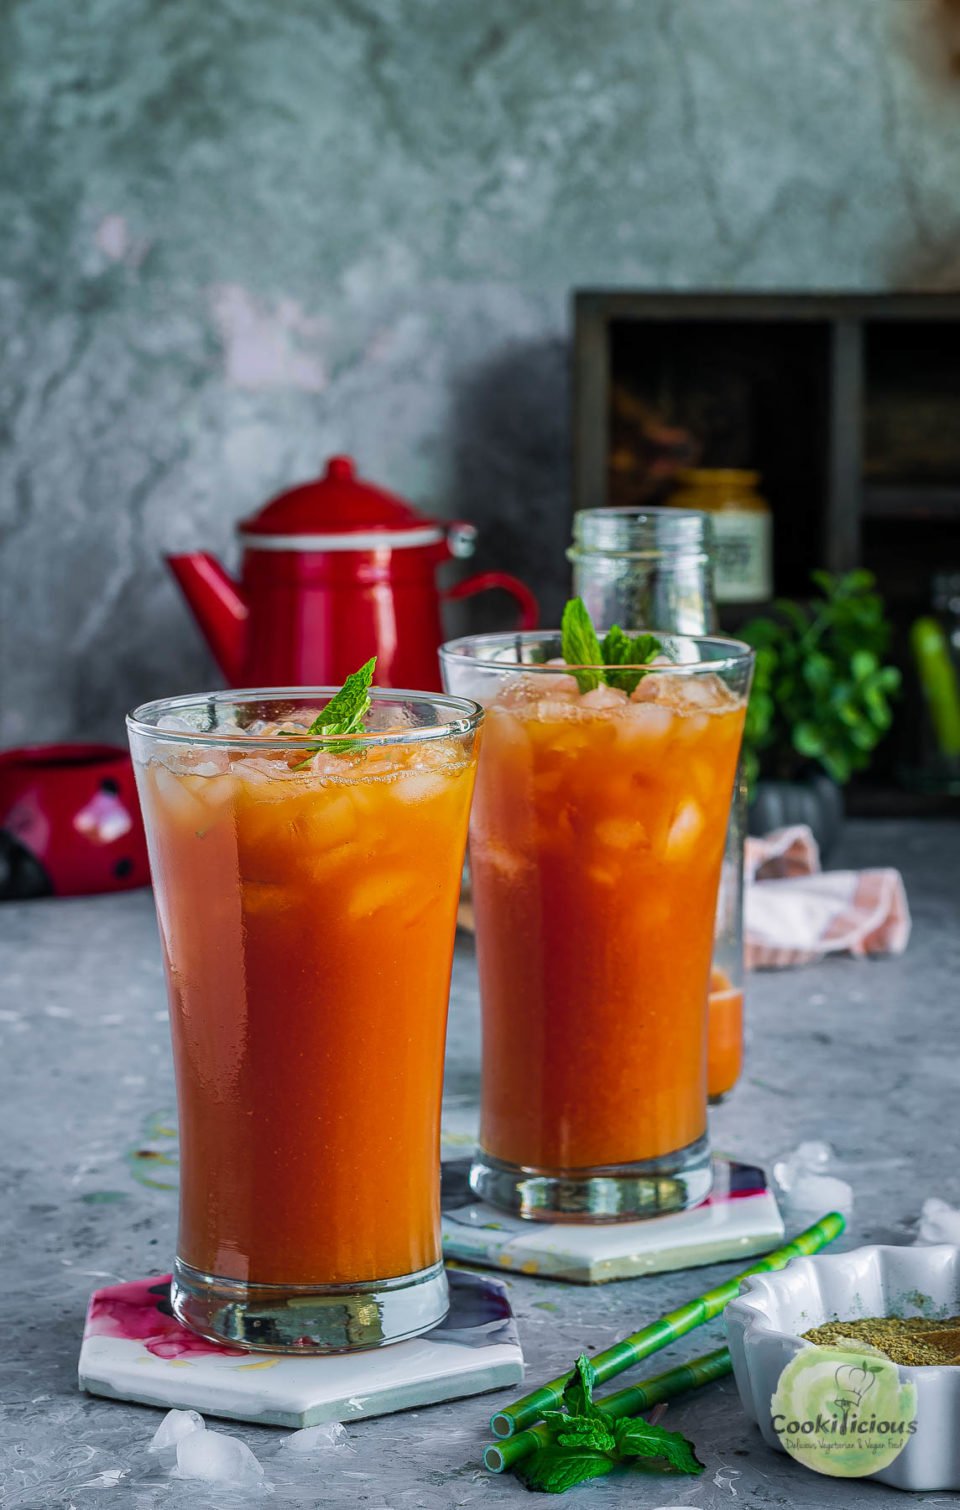 2 glasses of watermelon juice recipe - Sugar Free Drink placed over coasters and garnished with mint leaves